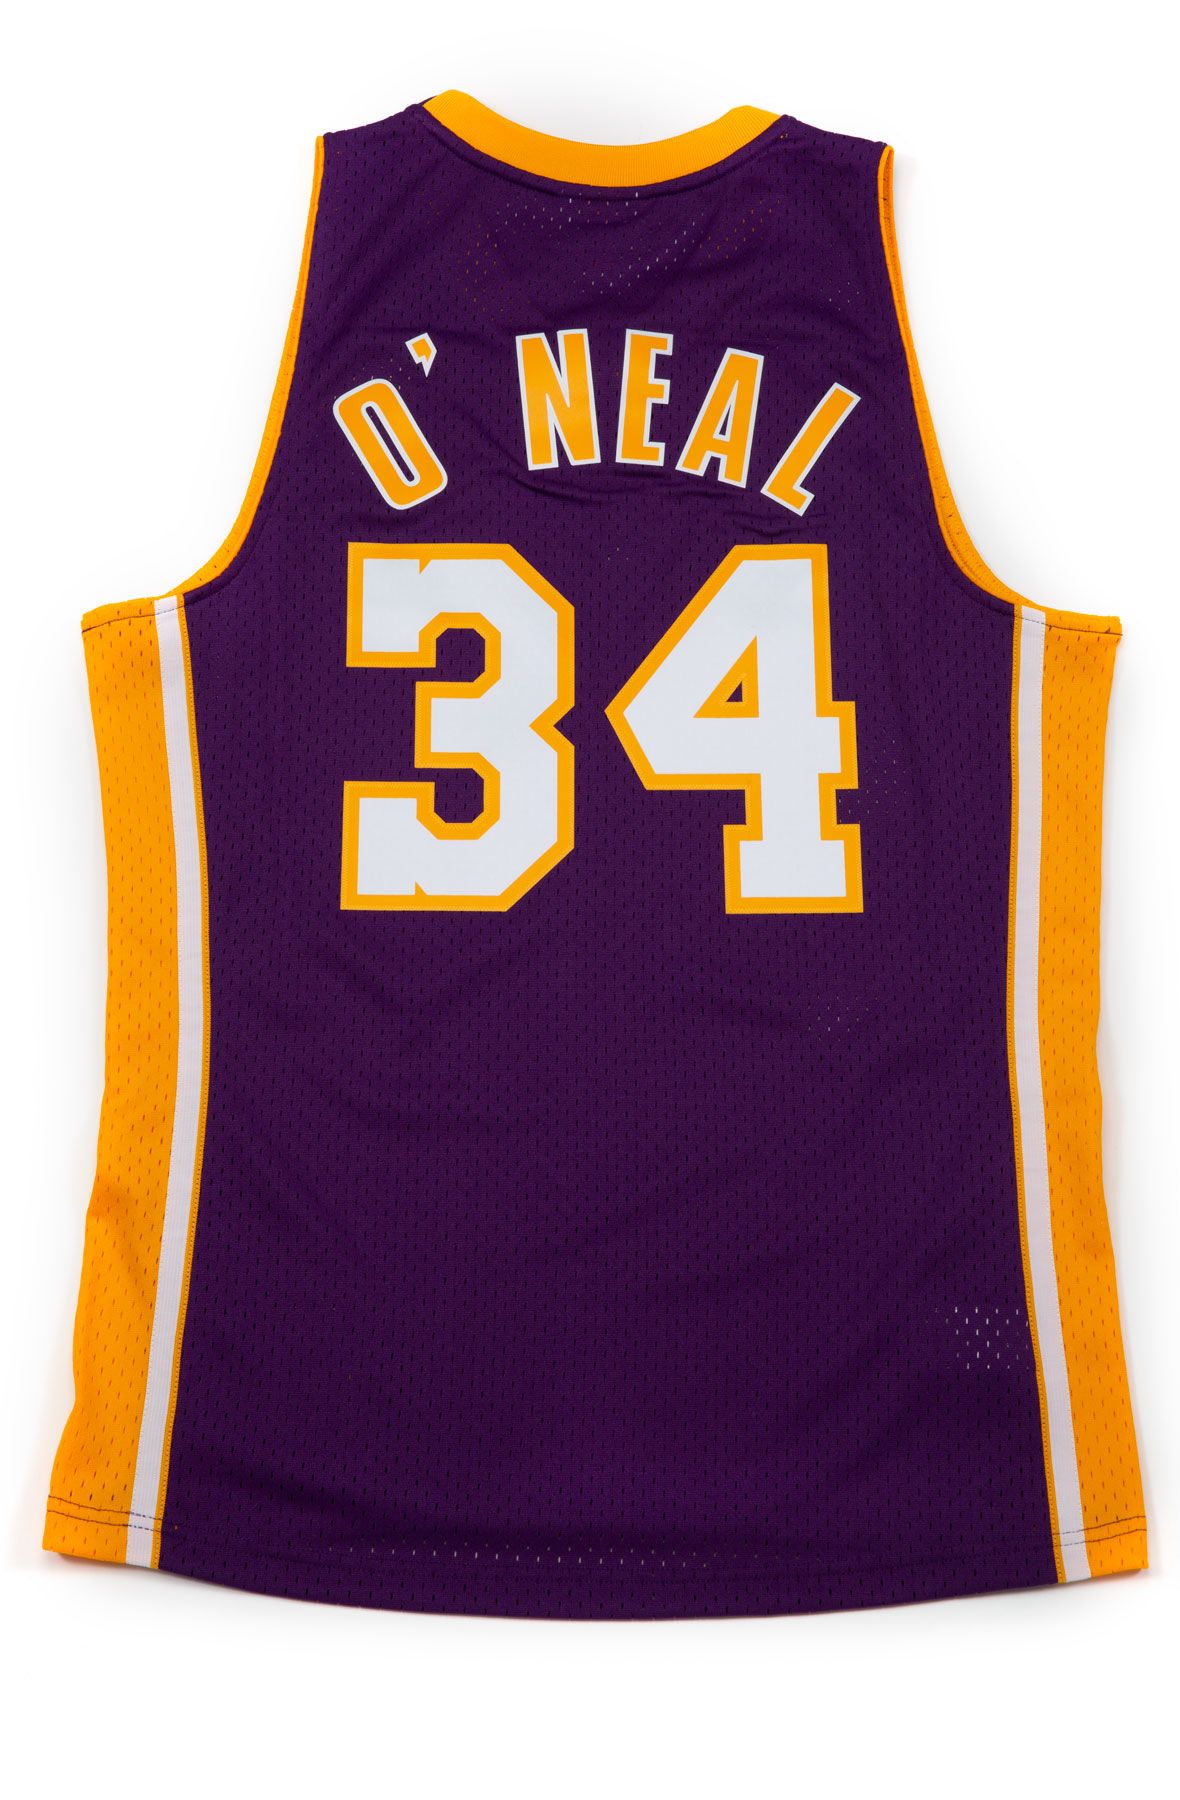 Swingman Jersey Los Angeles Lakers Home 1999-00 Shaquille O'Neal - Shop  Mitchell & Ness Swingman Jerseys and Replicas Mitchell & Ness Nostalgia Co.